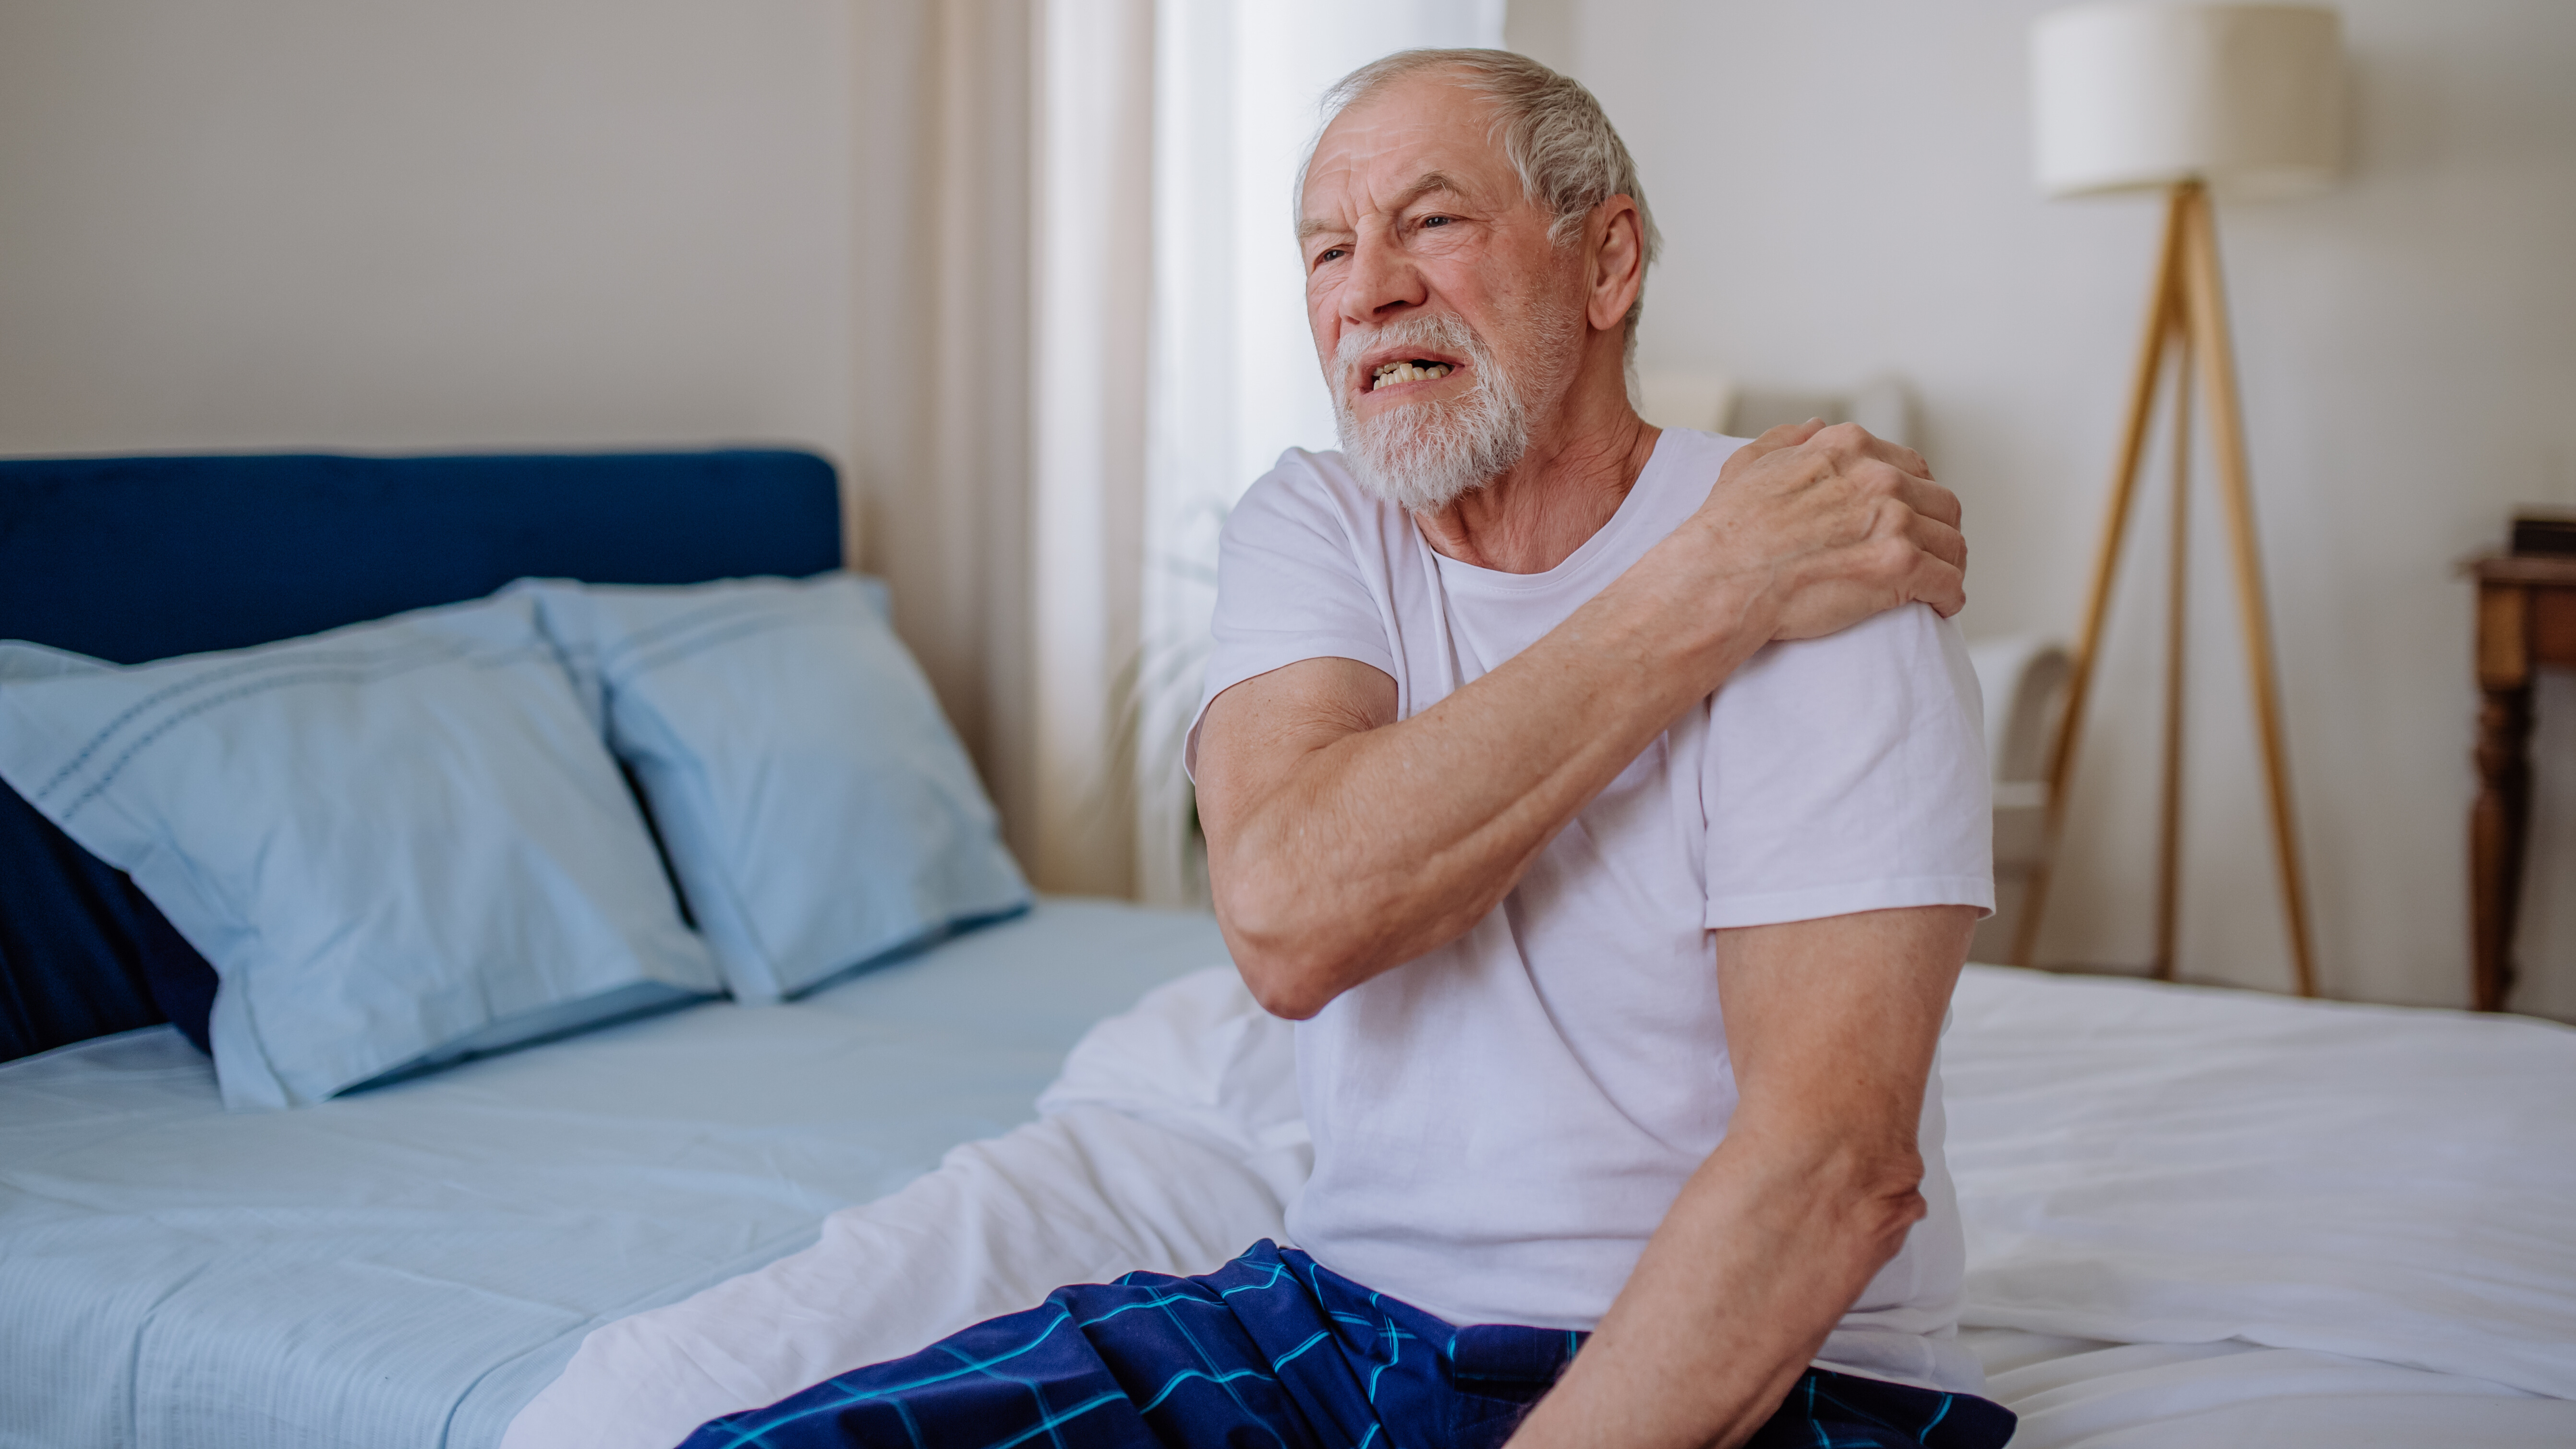 A man sits in bed with shoulder pain